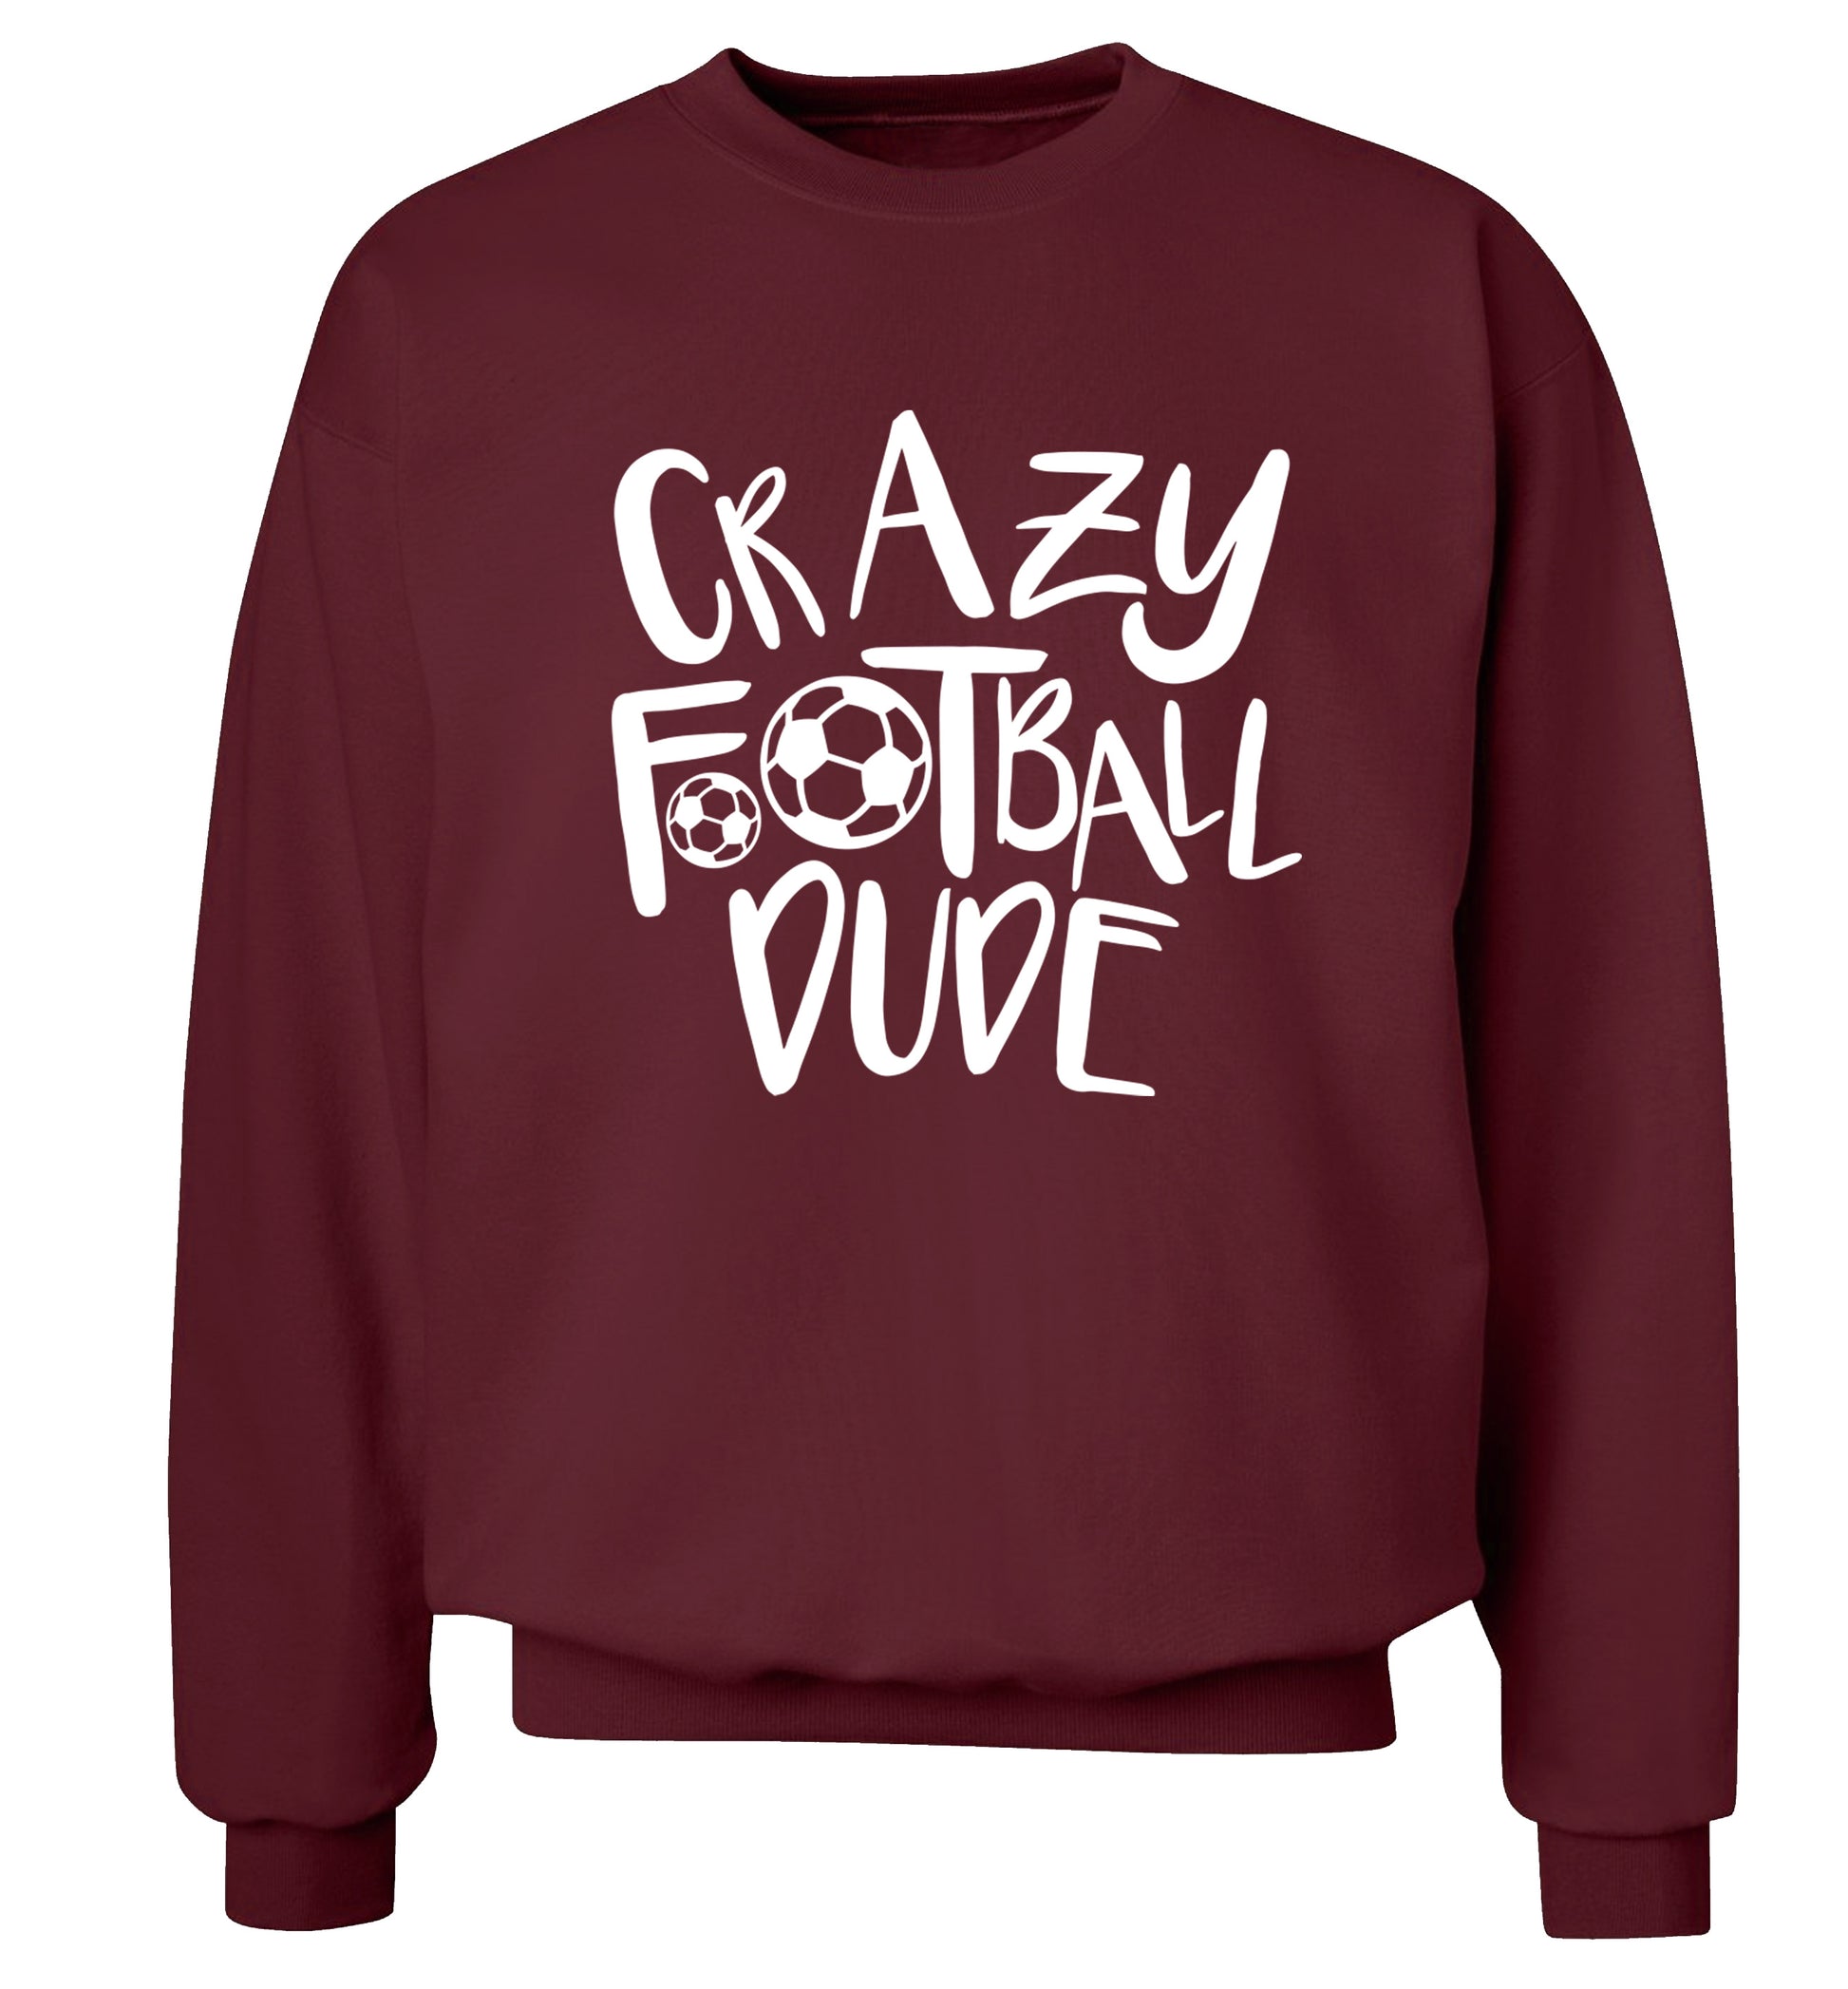 Crazy football dude Adult's unisexmaroon Sweater 2XL